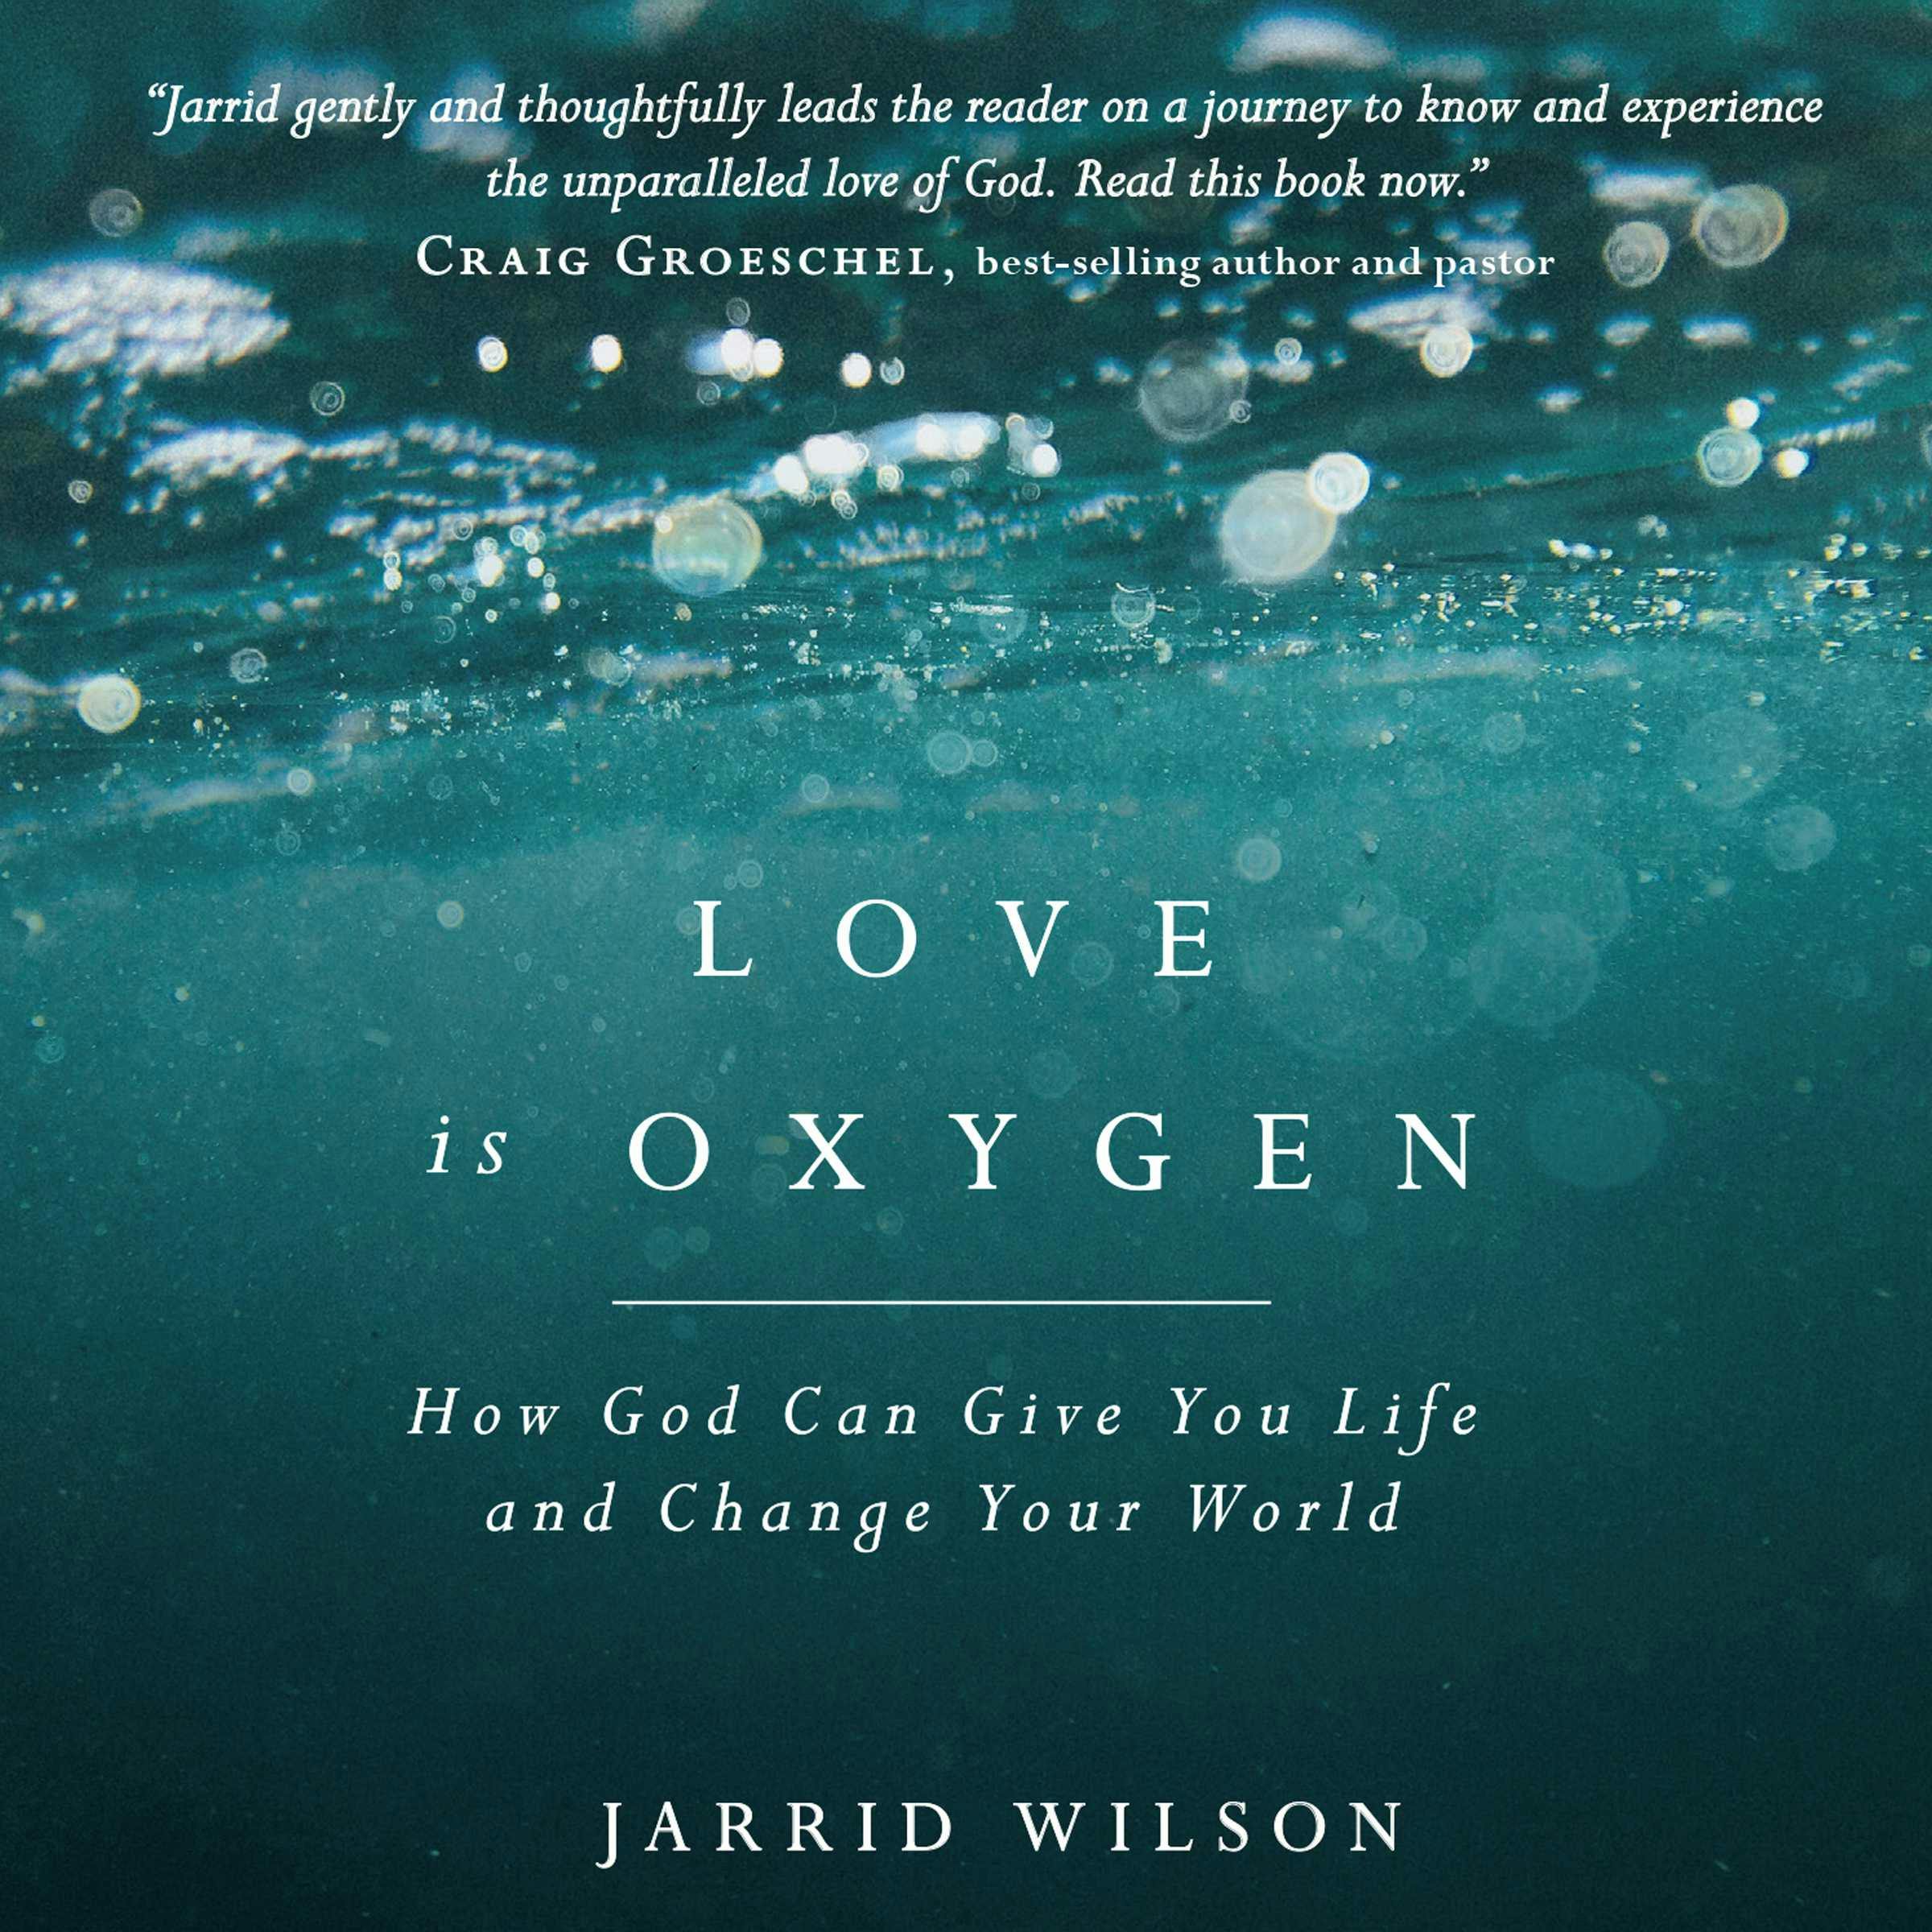 Love is Oxygen: How God Can Give You Life and Change Your World - Jarrid Wilson